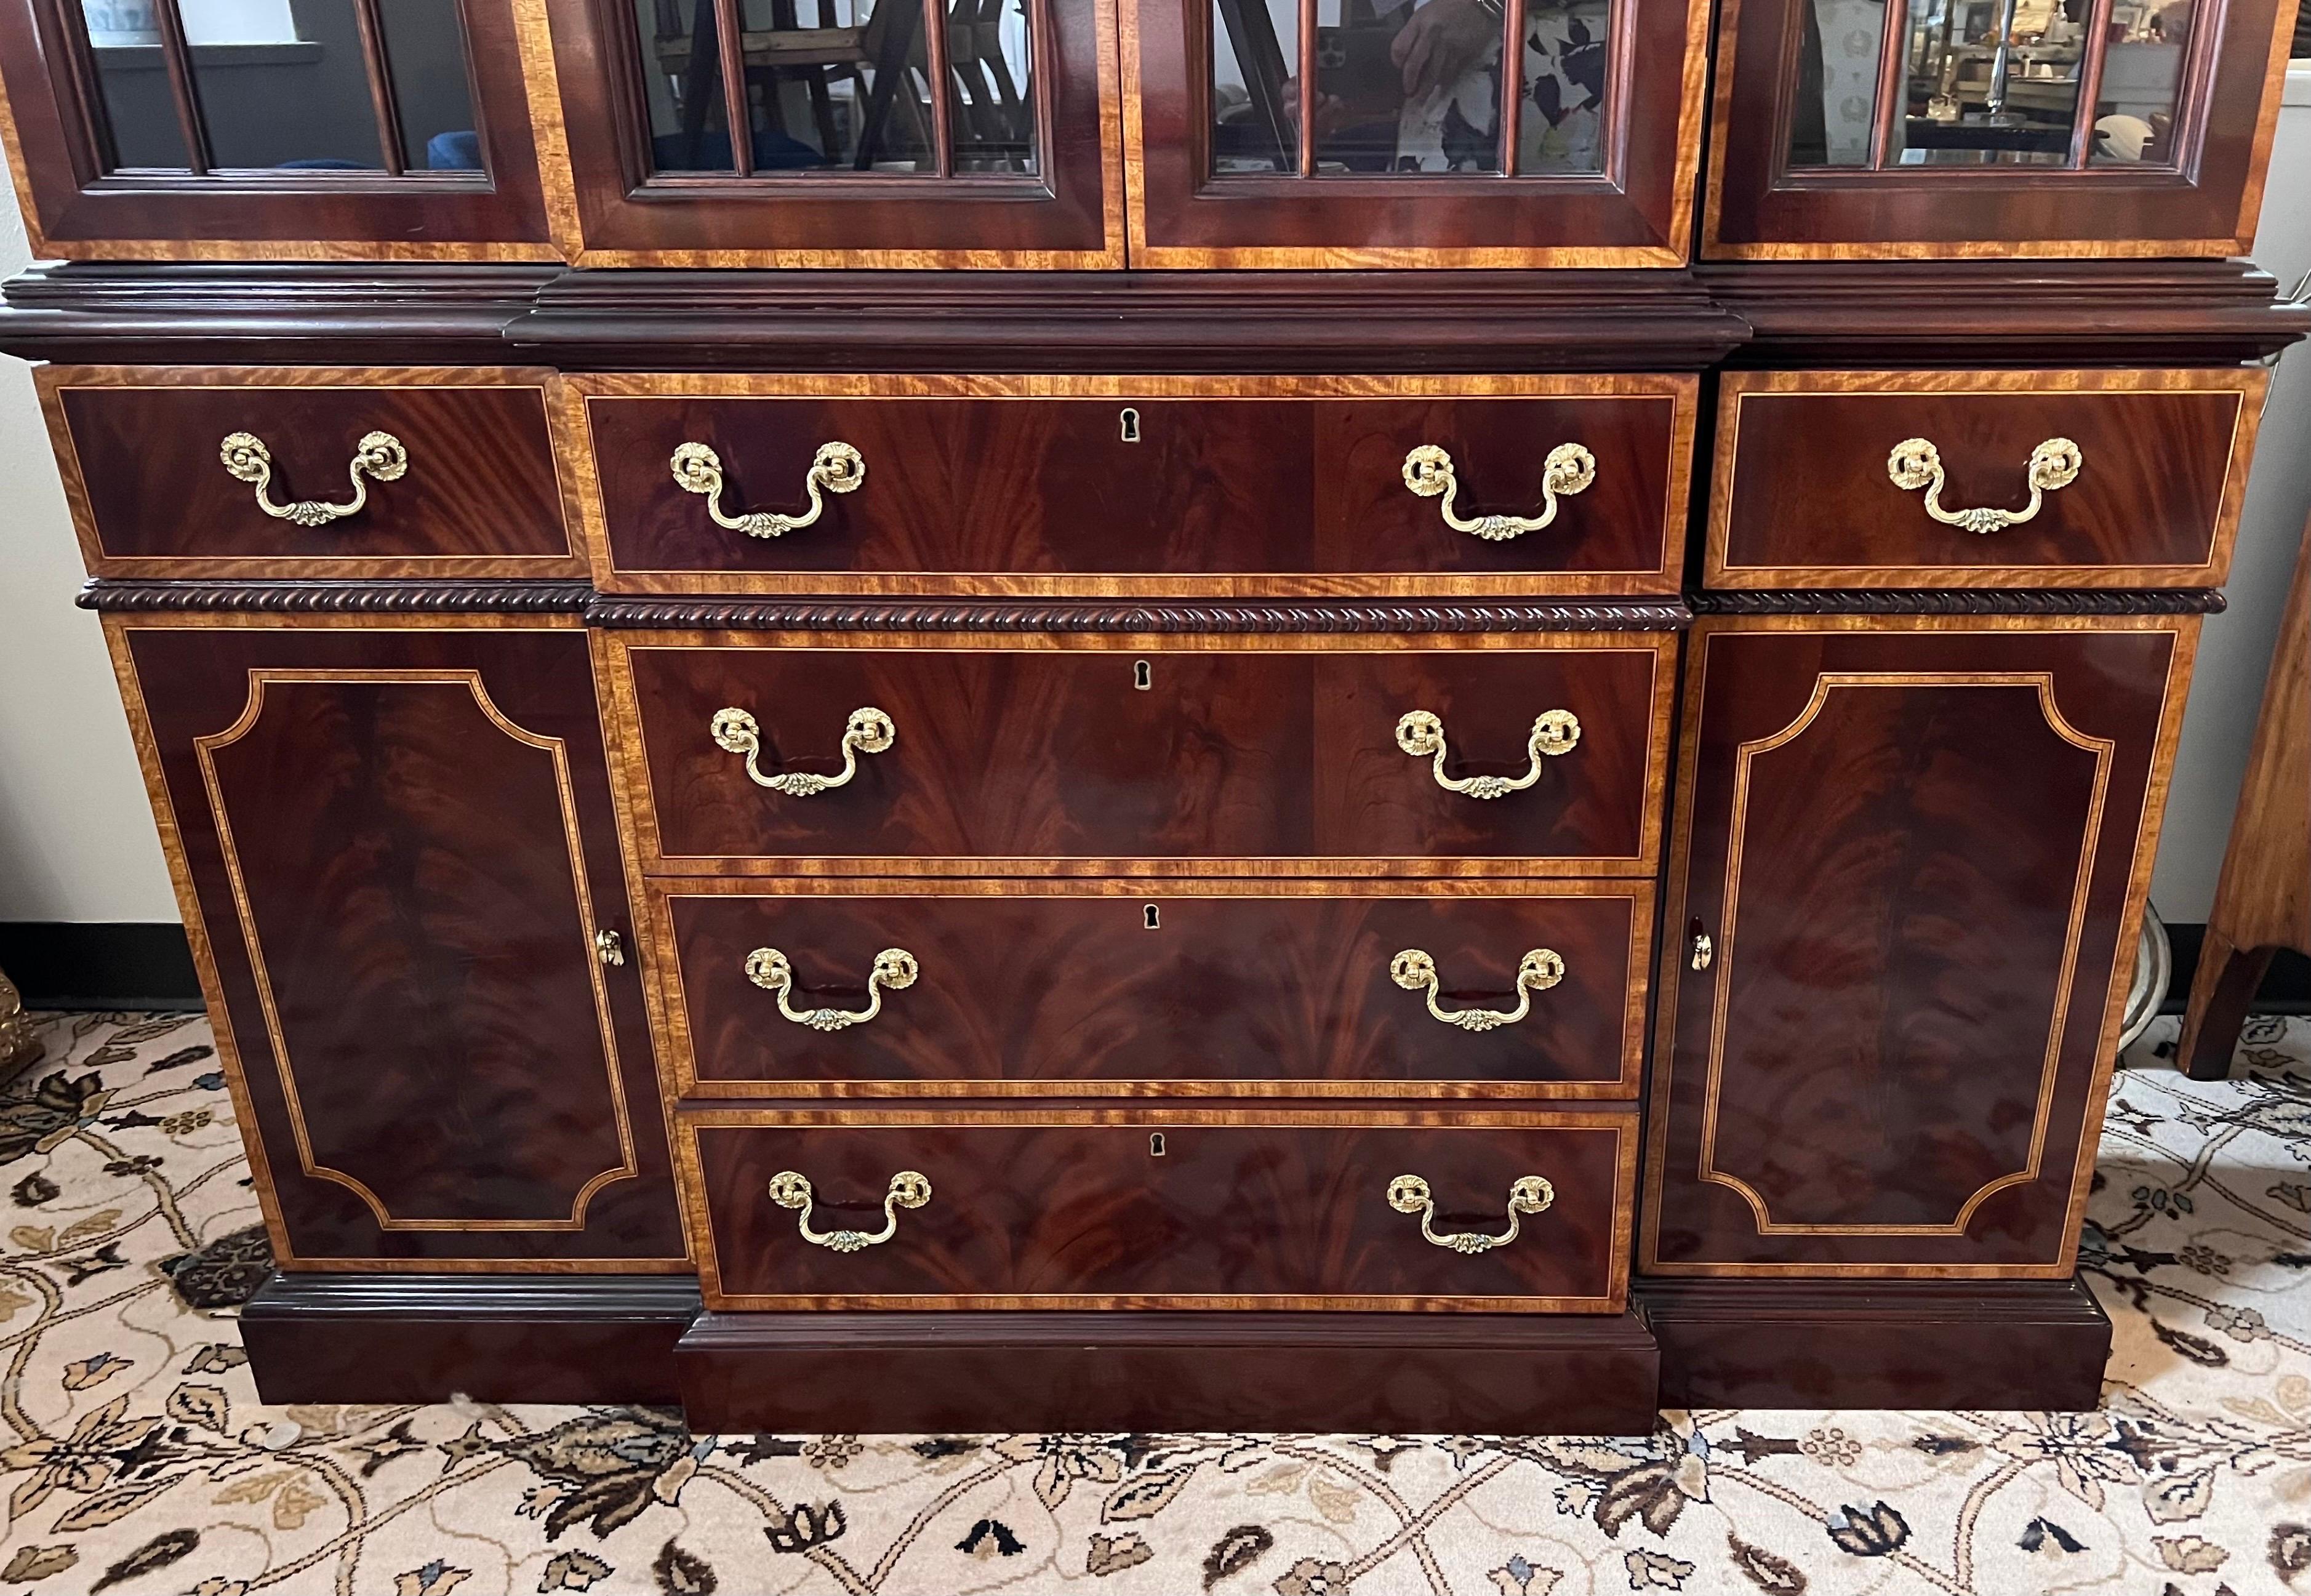 An exquisite flame mahogany china breakfront by Councill Craftsmen.  Features inlaid flame mahogany with ornate brass hardware, pediment with finial and dentil moulding to top of 2pc cabinet.  Upper cabinet is lighted and features nine glass shelves